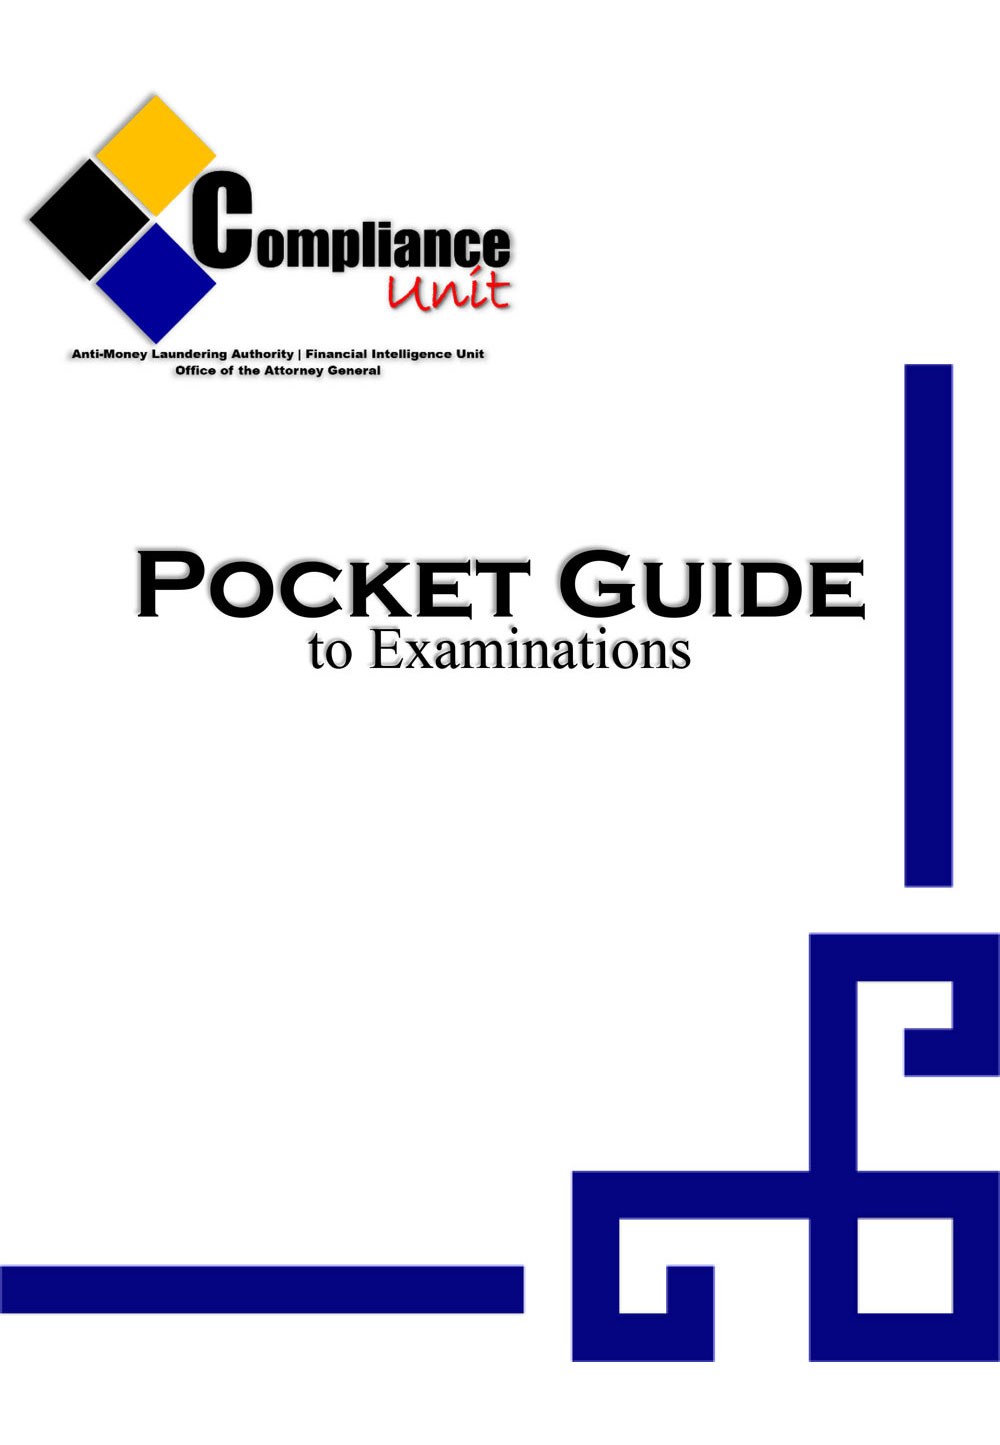 Pocket Guide to On-site Examinations